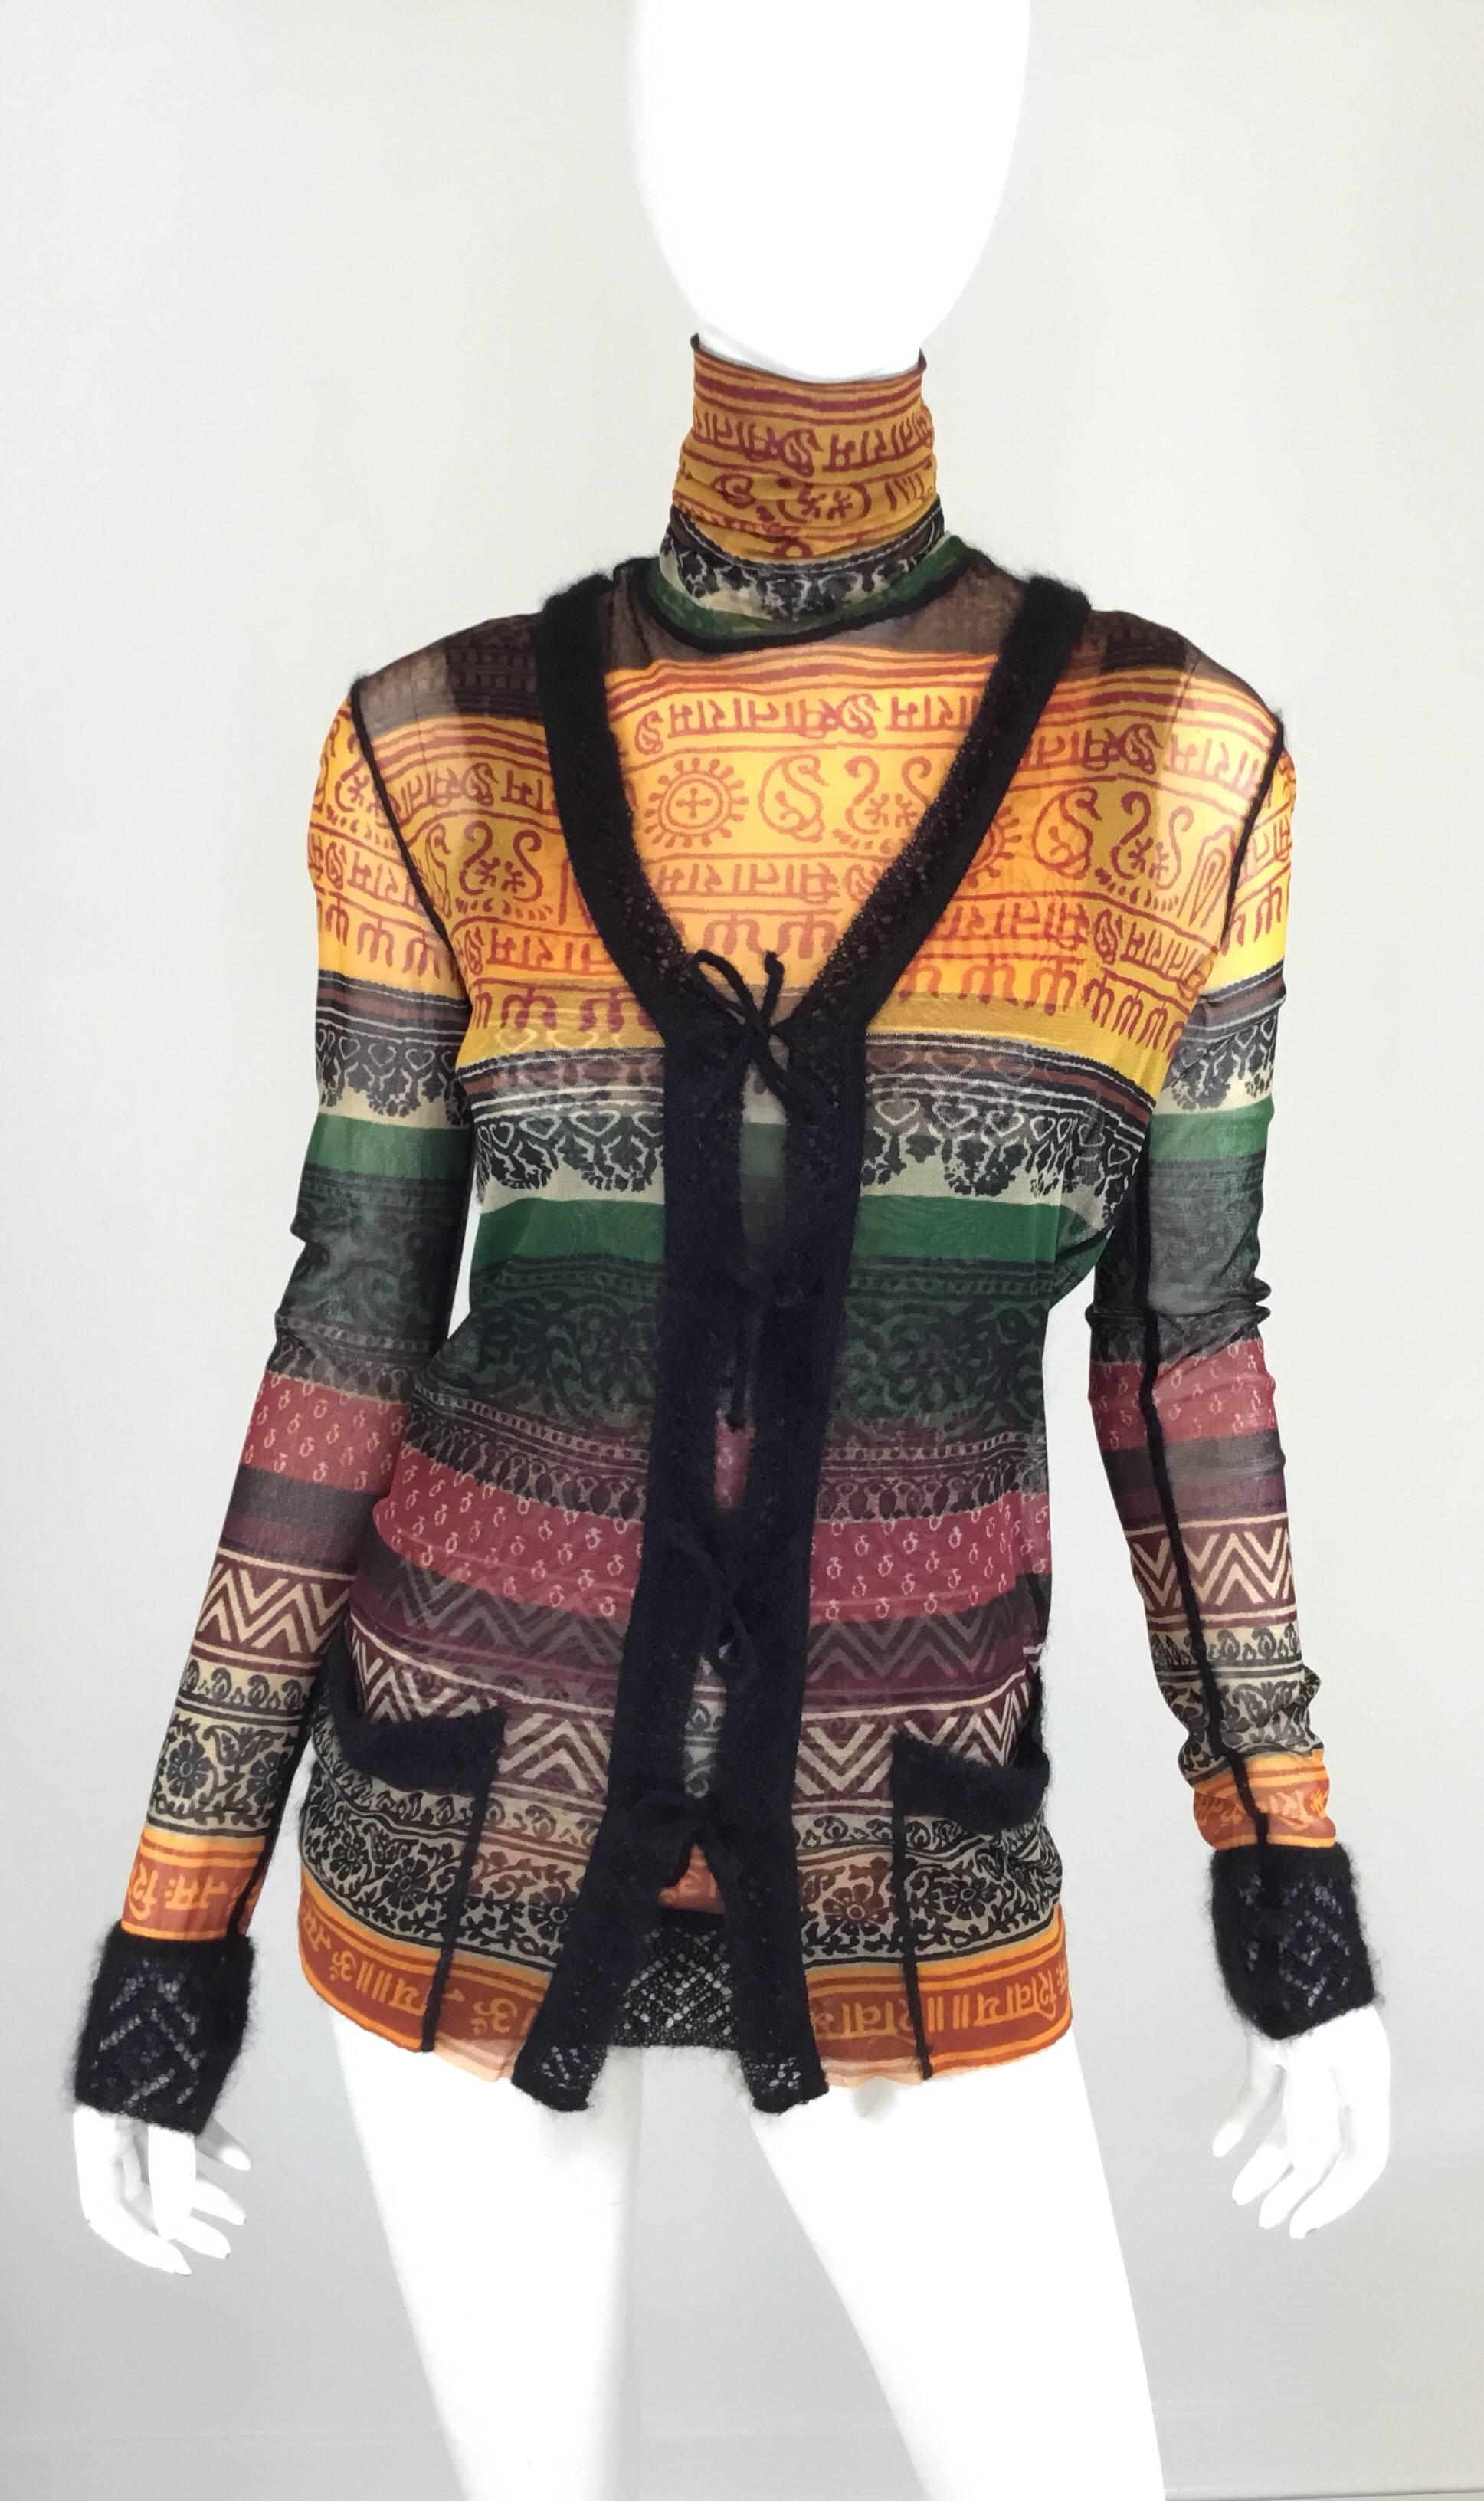 Jean Pail Gaultier top features a multicolored print throughout and knitted wool trimmings. Cardigan has knit wool string tie closures along the front and tank top has a turtleneck style with knitted trimmings along the hem. Cardigan is labeled a